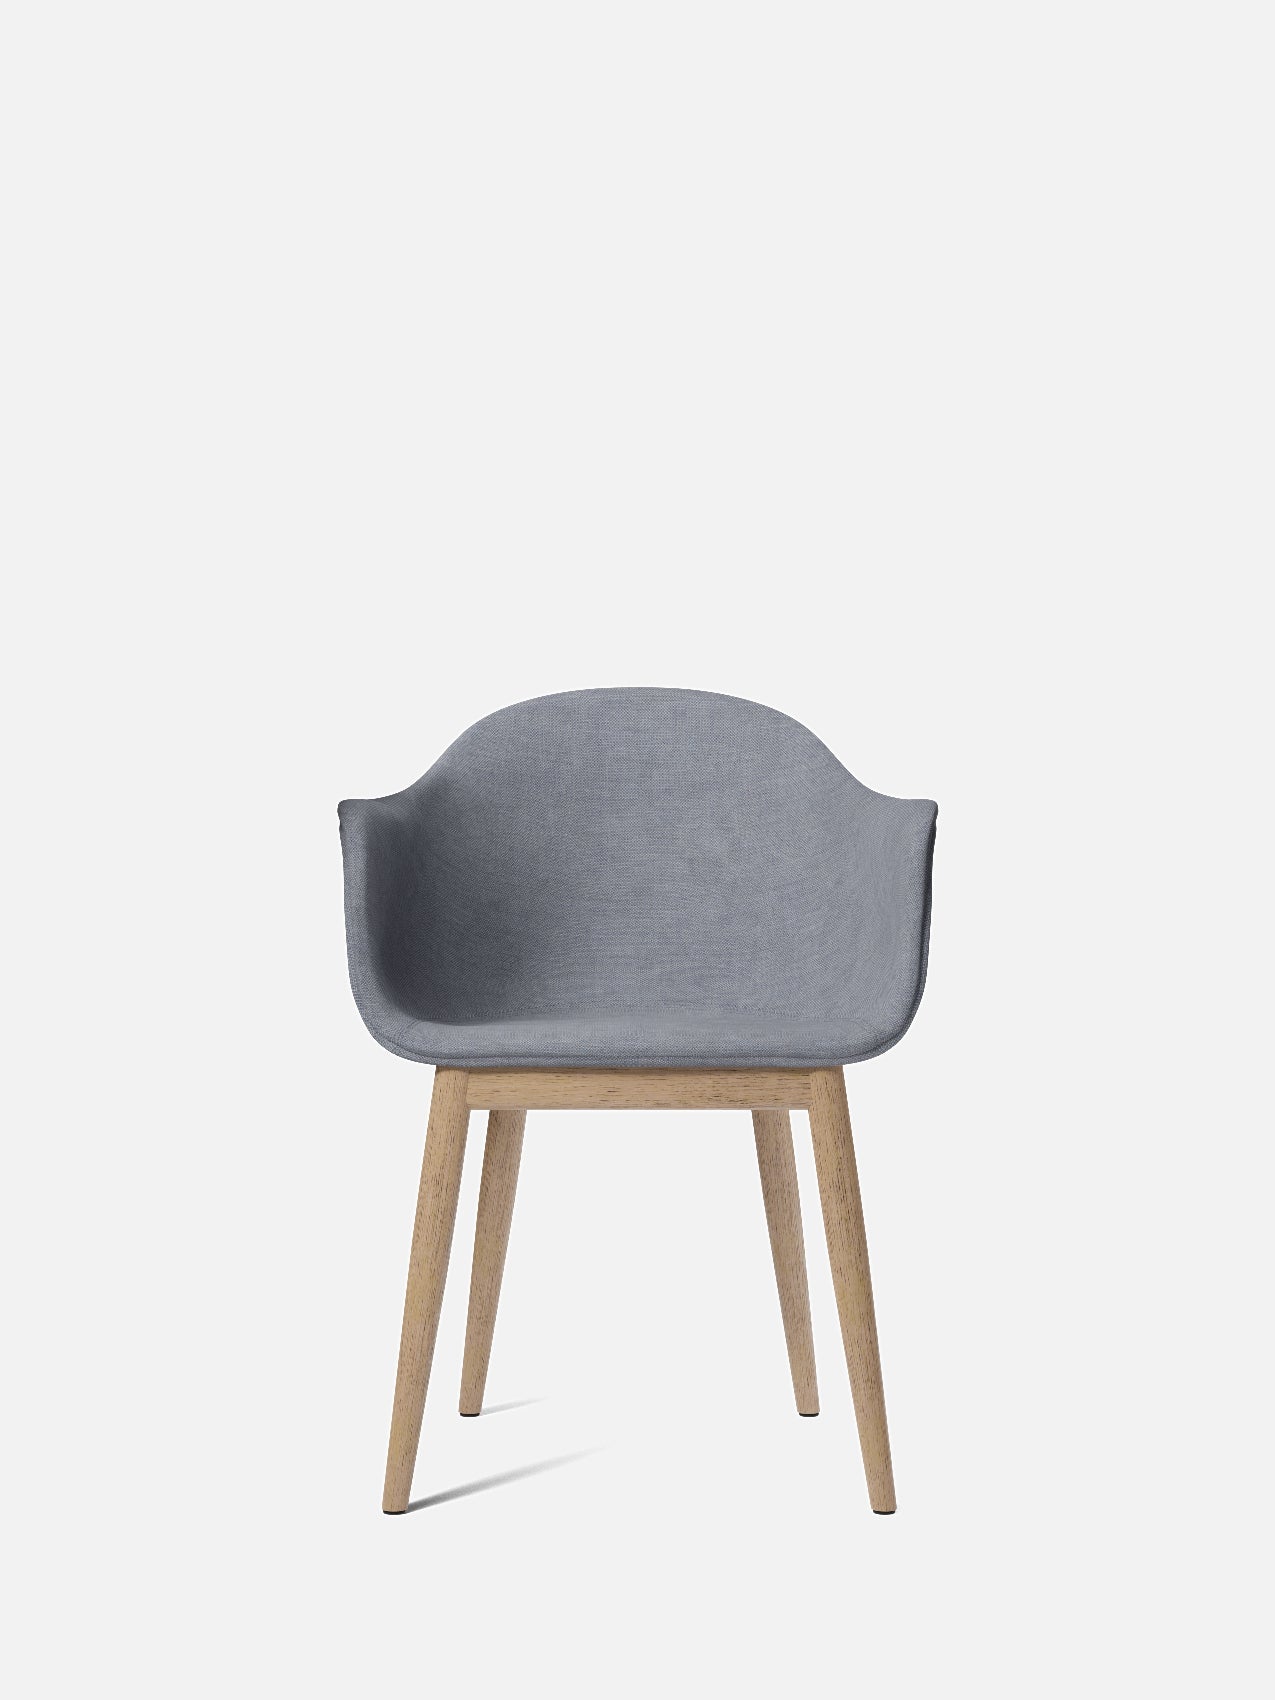 Harbour Arm Chair, Upholstered-Chair-Norm Architects-Natural Oak-751/Fiord2-menu-minimalist-modern-danish-design-home-decor